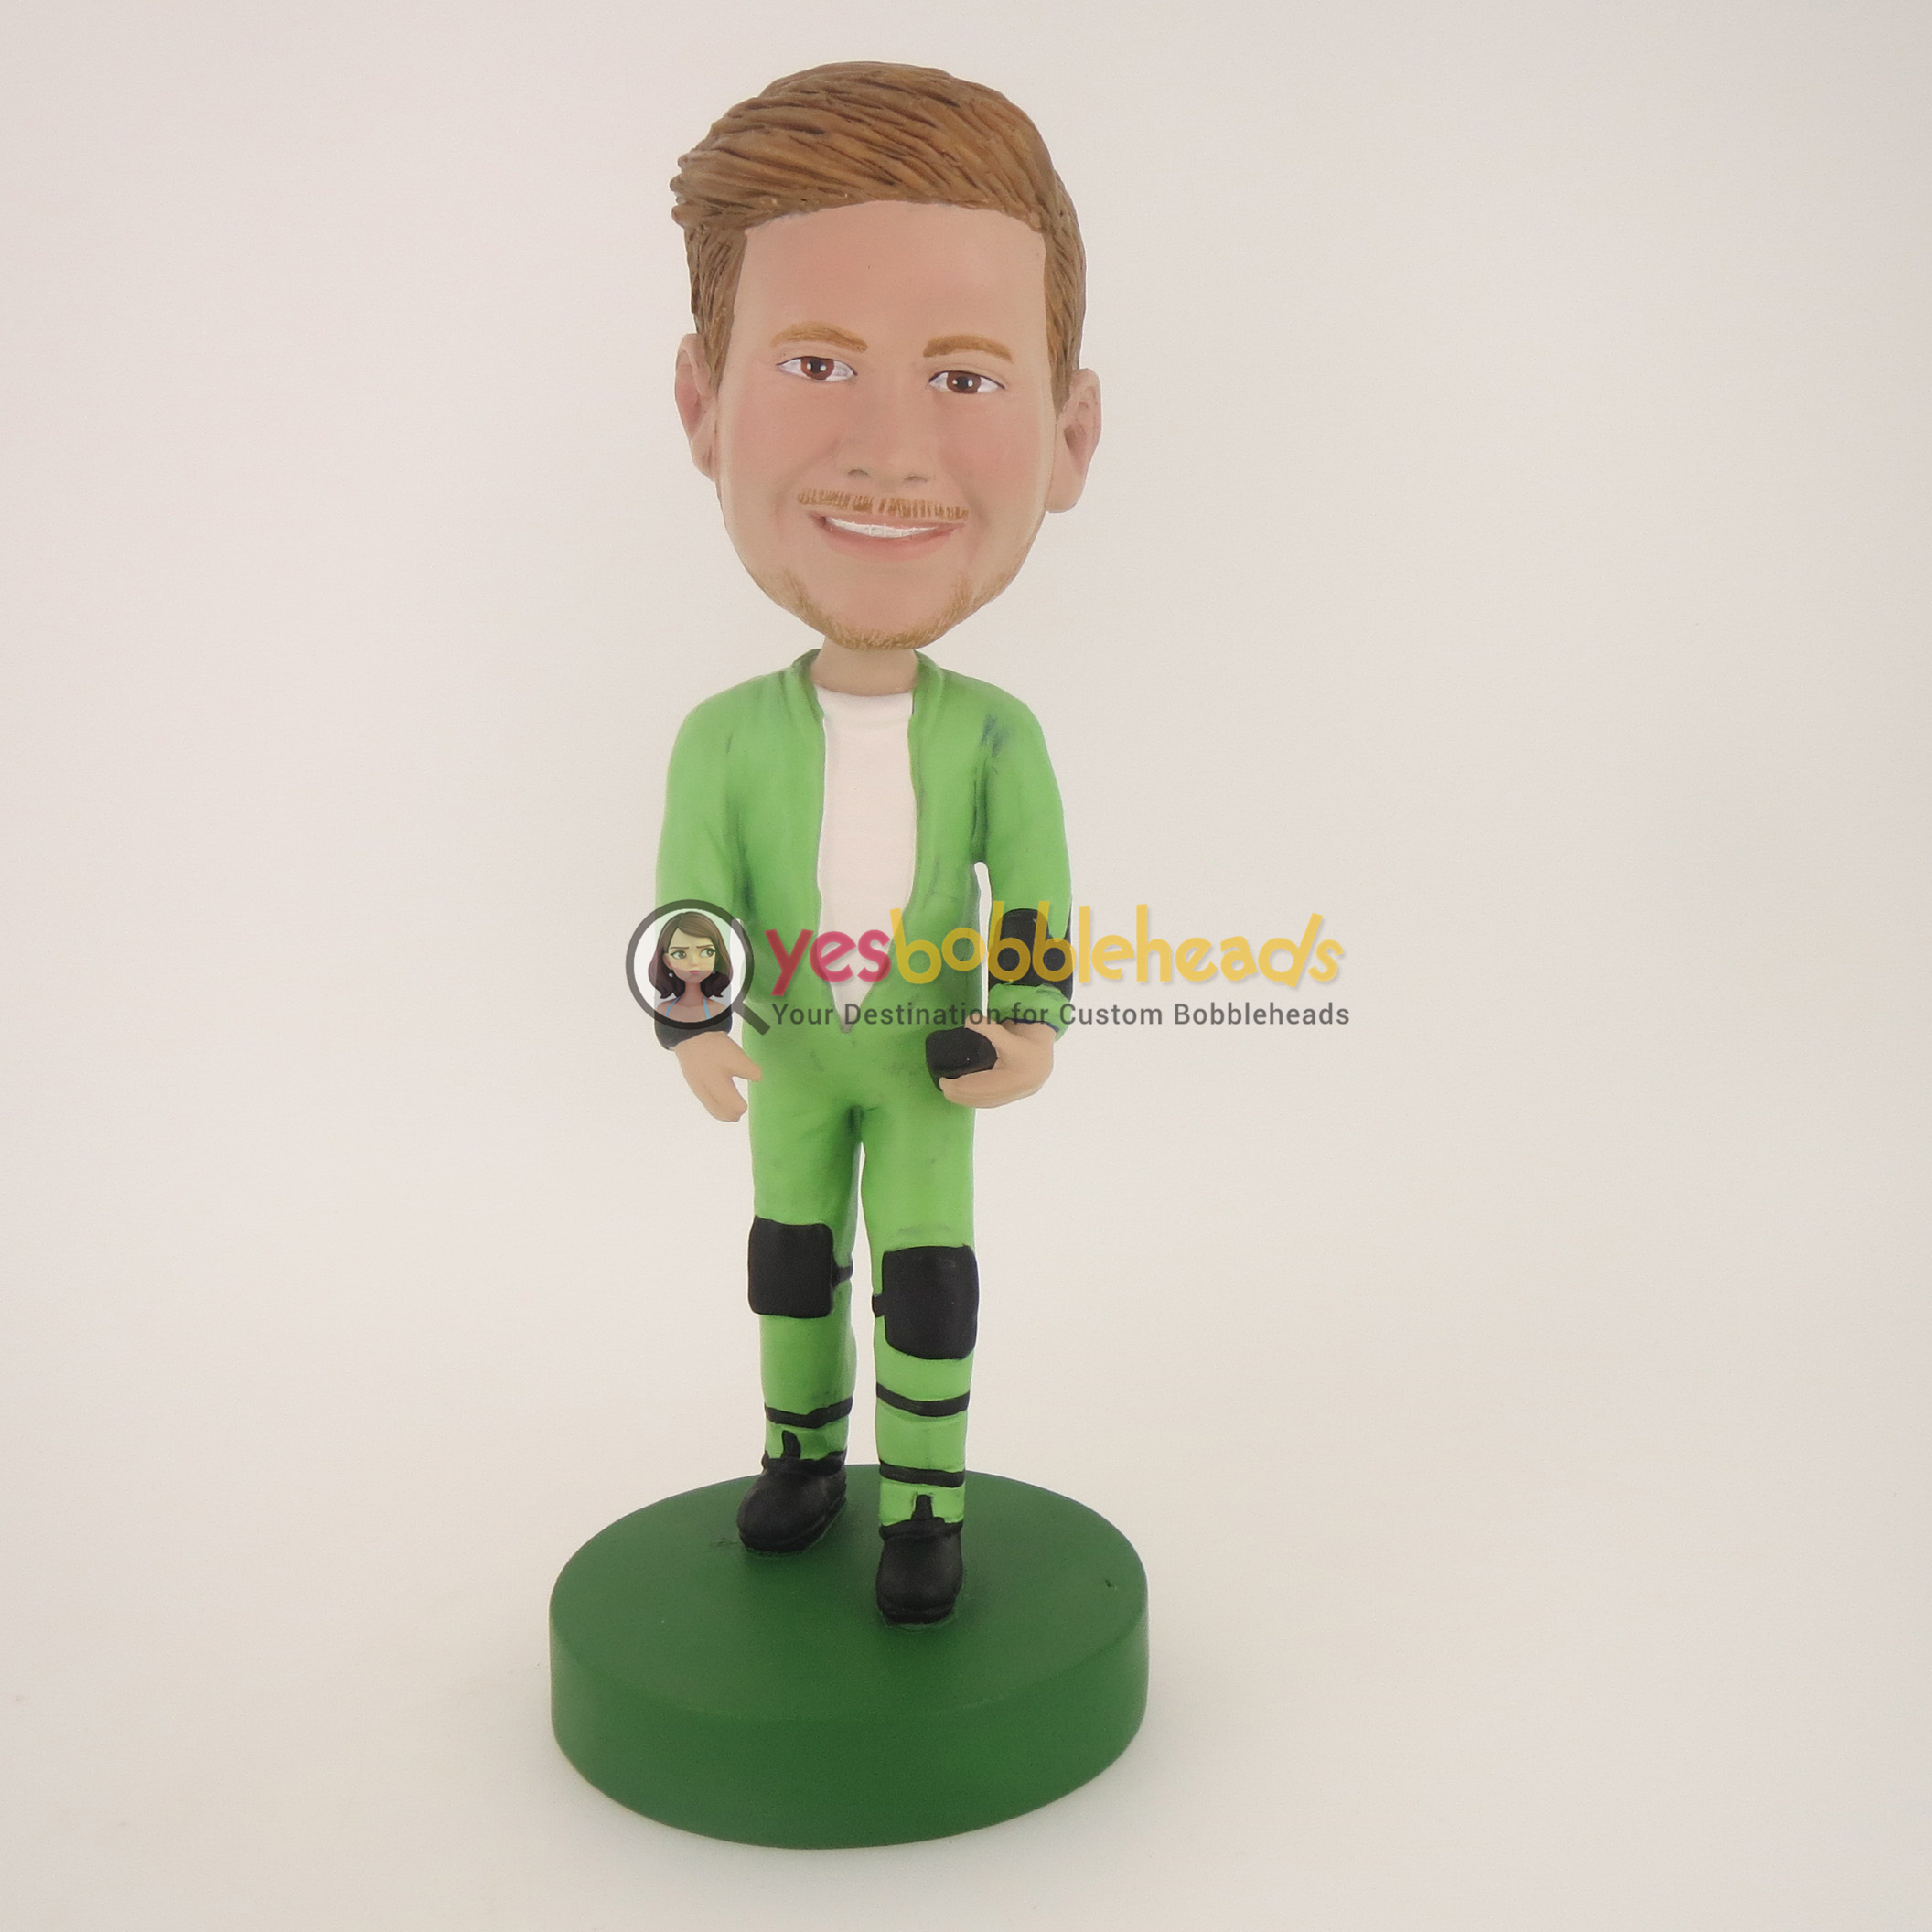 Picture of Custom Bobblehead Doll: Man In Cool Green Jacket